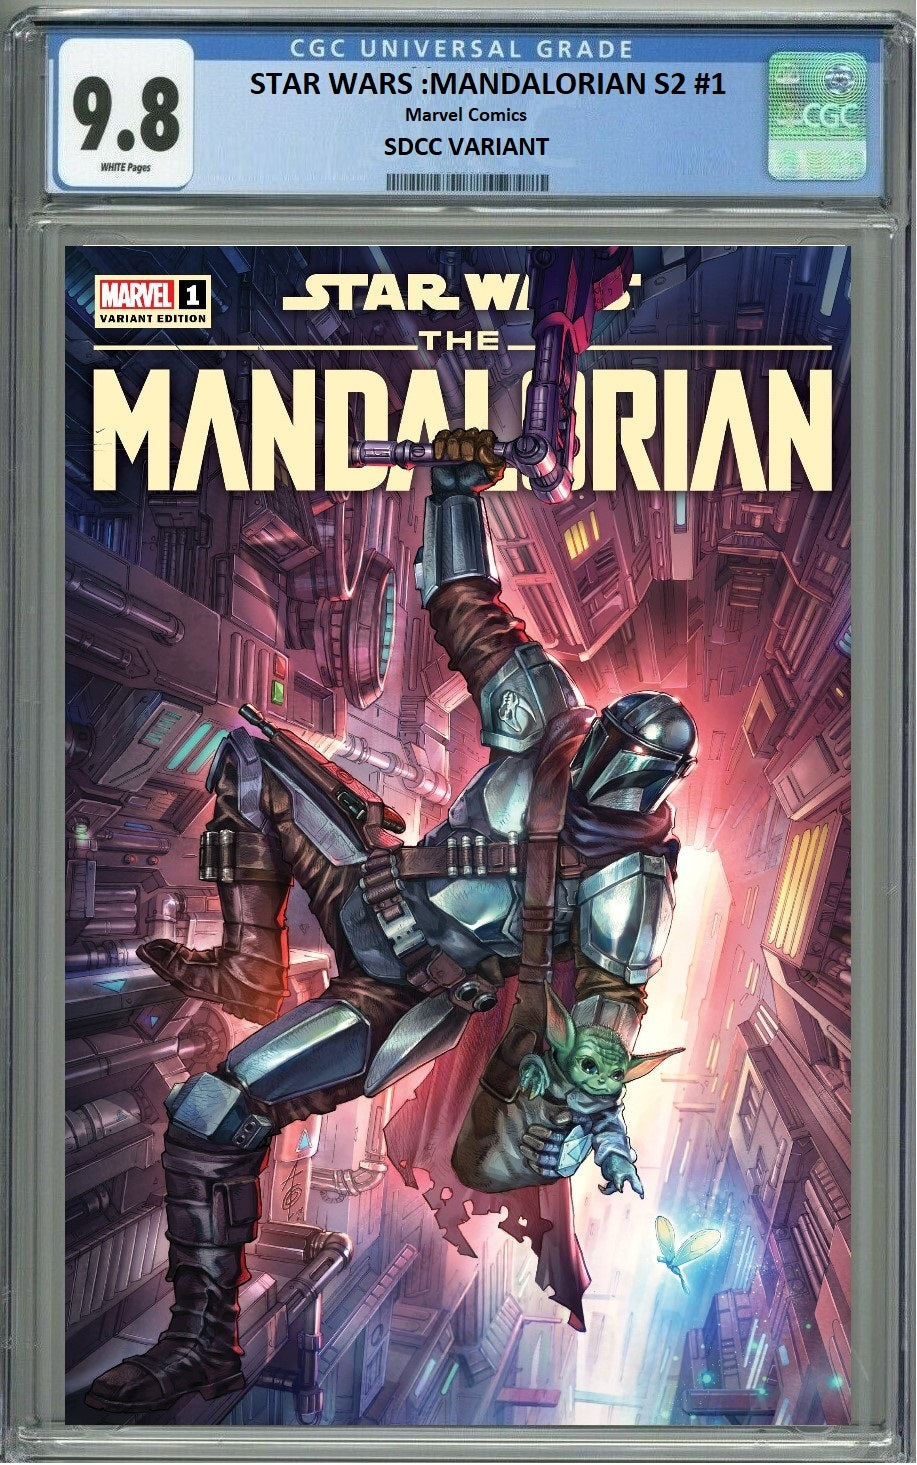 STAR WARS MANDALORIAN SEASON 2 #1 ALAN QUAH SDCC VARAINT LIMITED TO 500 WITH NUMBERED TRADING CARD COA - RAW & GRADED OPTIONS